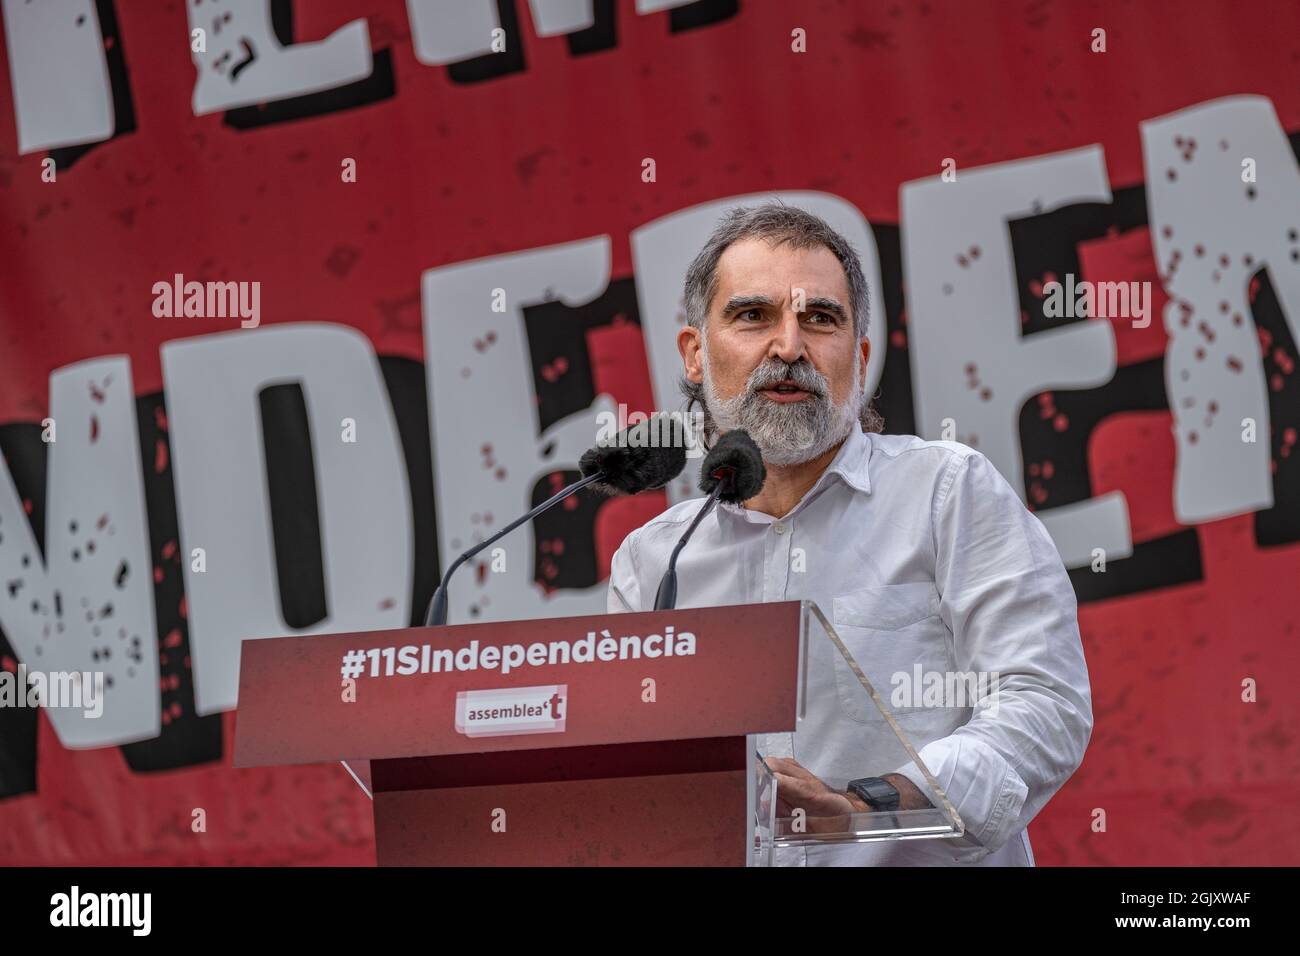 Jordi Cuixart, president of Òmnium Cultural speaks on the stage of Avenida Marquès de l'Argentera.According to figures from the organizers, there are around 400,000 people, according to the Guàrdia Urbana, a little more than 100,000 who convened under the slogan 'Lluitem i Guanyem la indepència' (let's fight and win Independence) have attended the unitary demonstration to celebrate September 11, Diada of Catalonia. Stock Photo